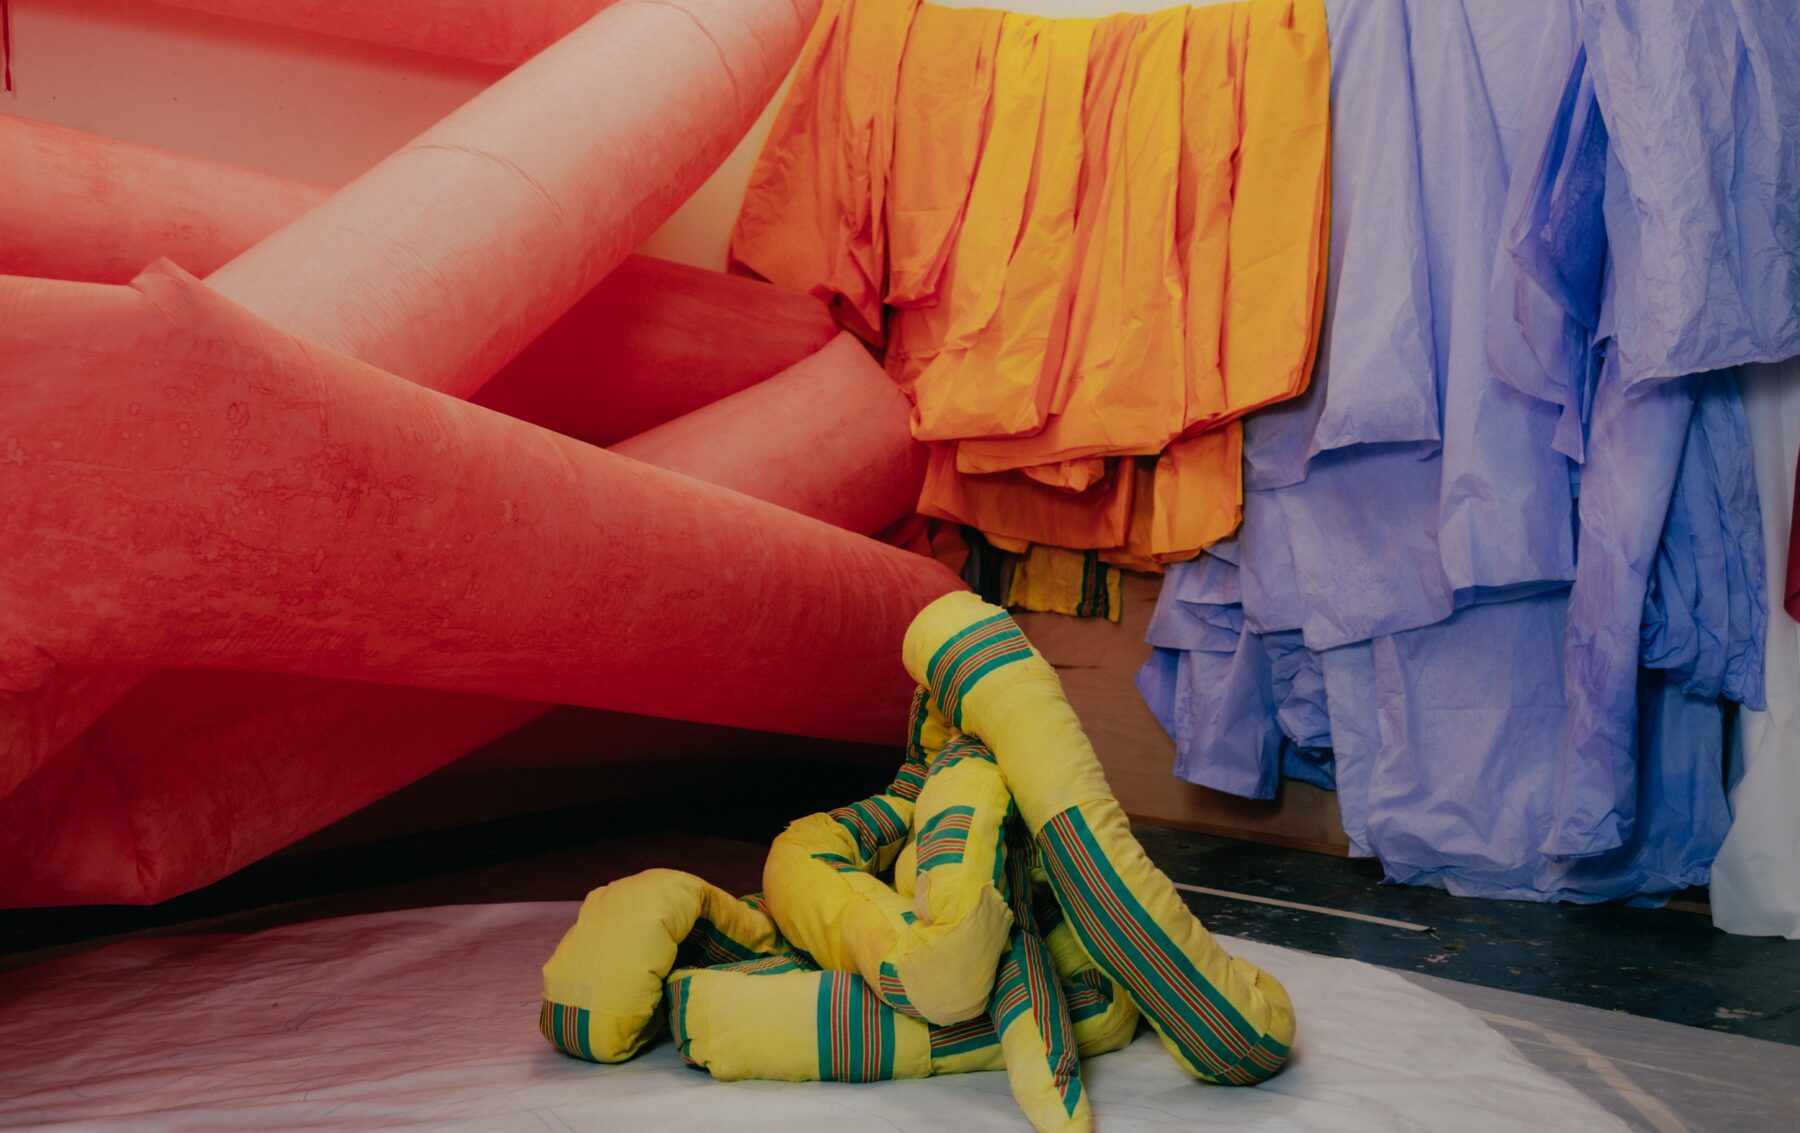 Colorful fabric pieces hanging from the walls, surrounding an inflatable yellow fabric sculpture arranged on the floor.